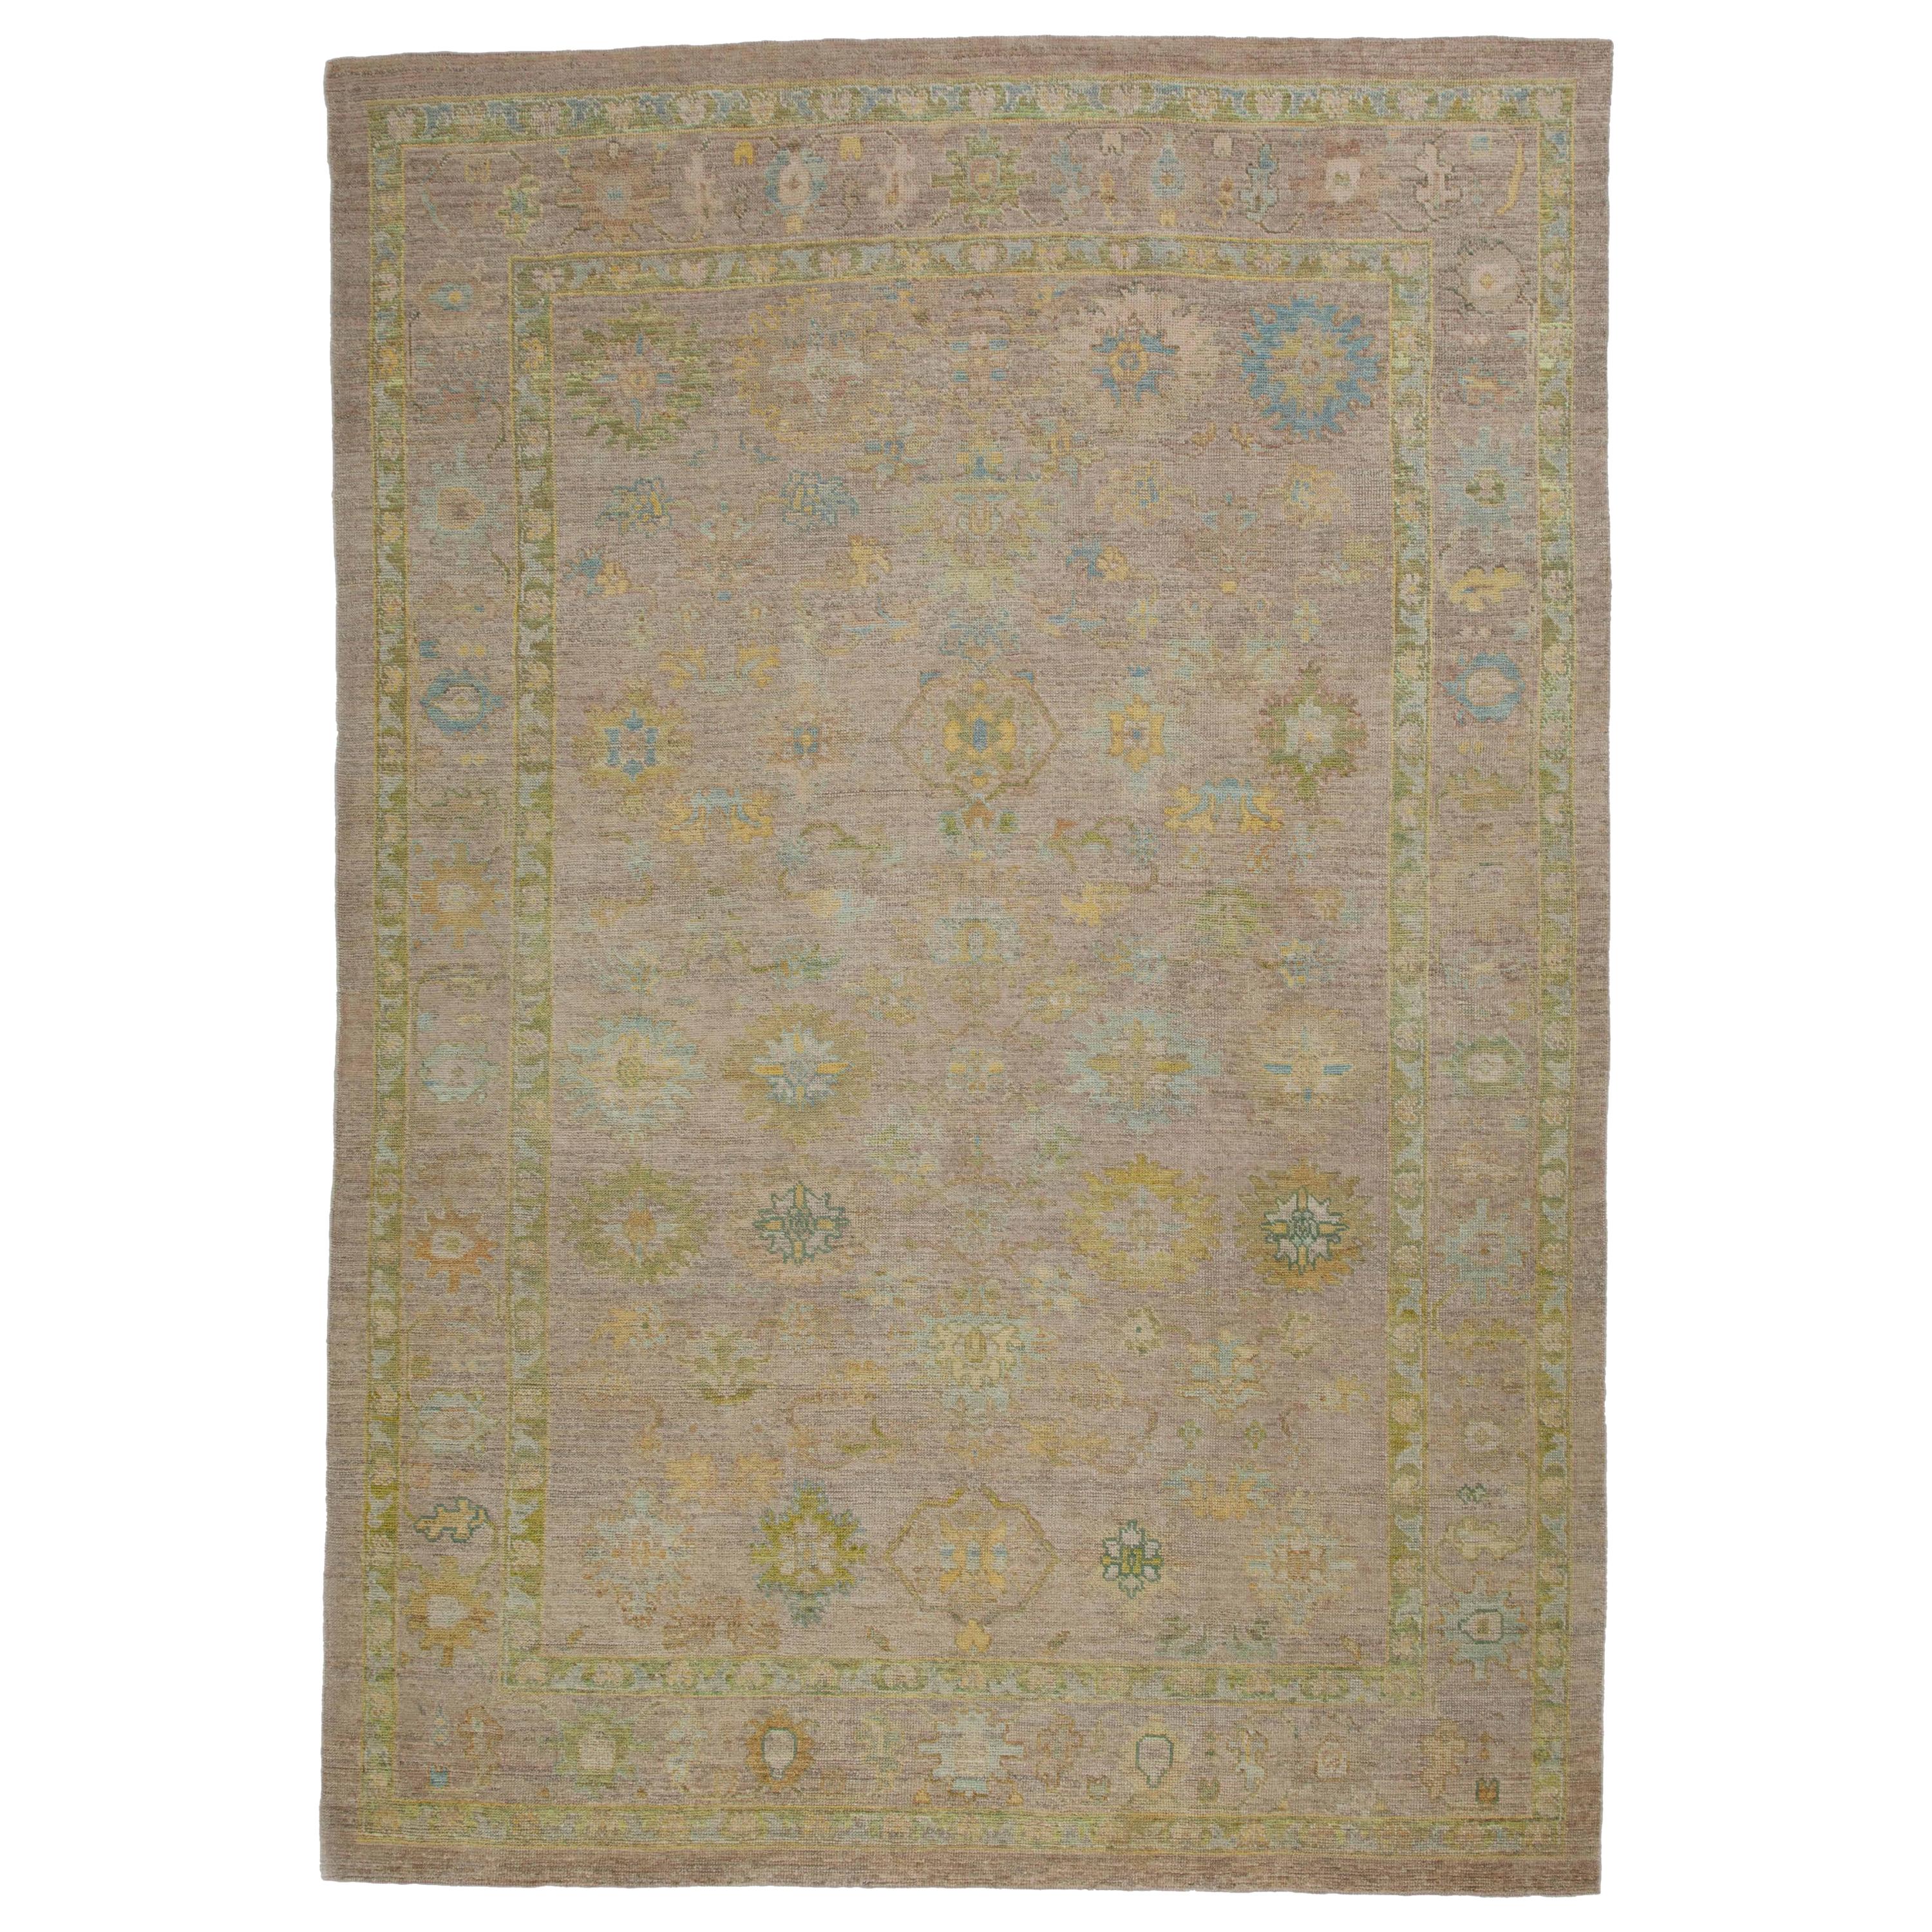 Contemporary Turkish Oushak Rug with Scattered Multicolored Floral Details